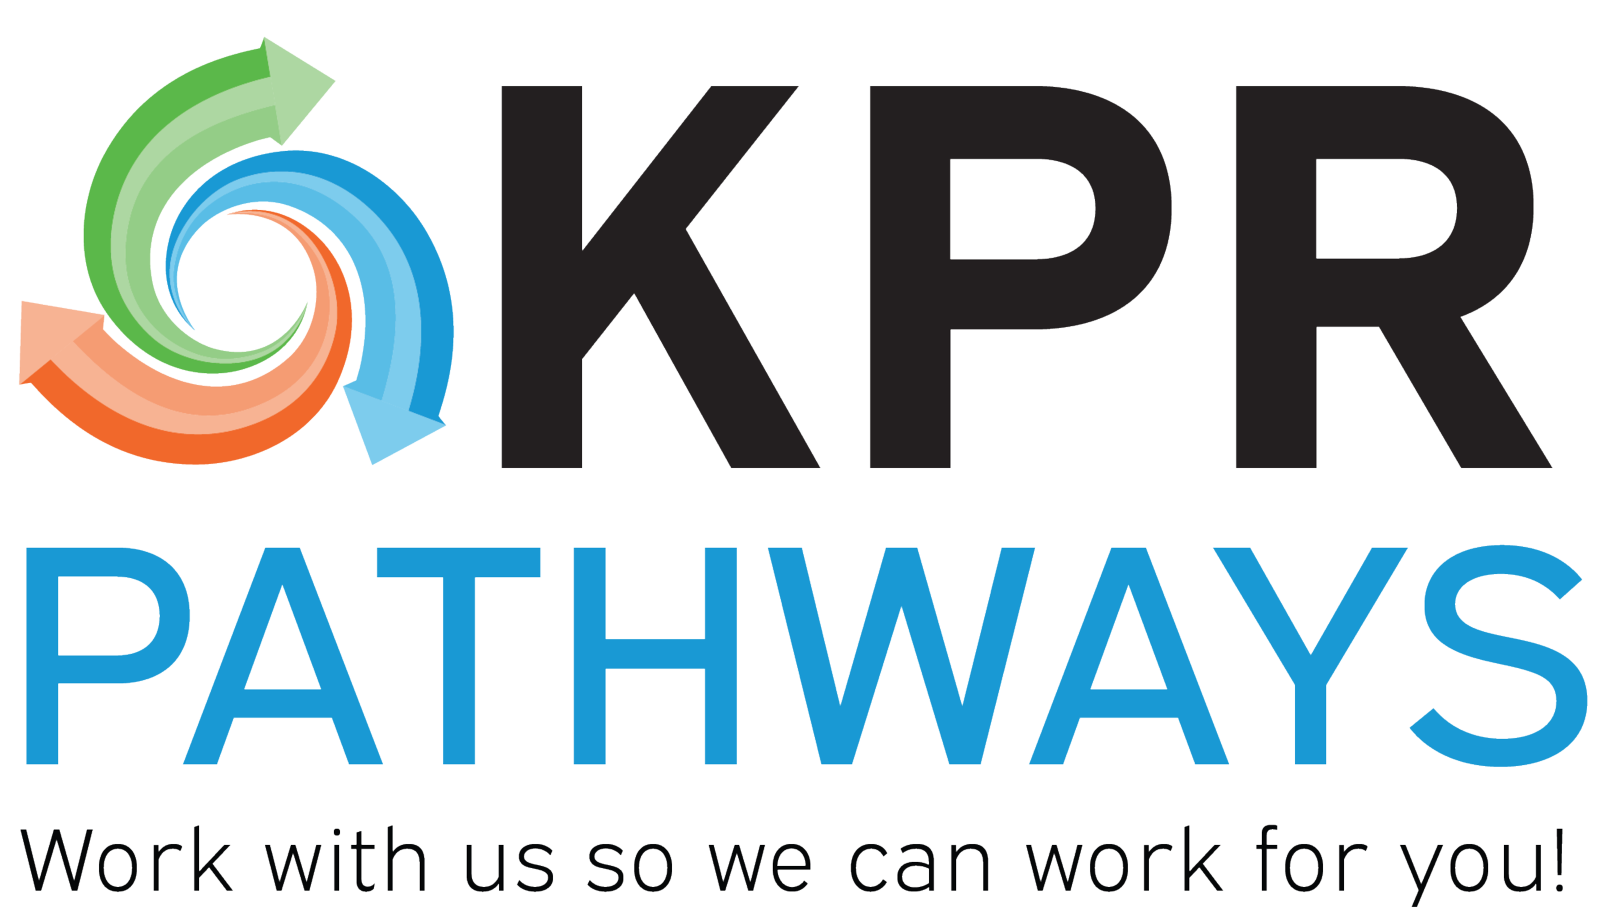 Work with us so we can work for you KPR Pathways slogan logo